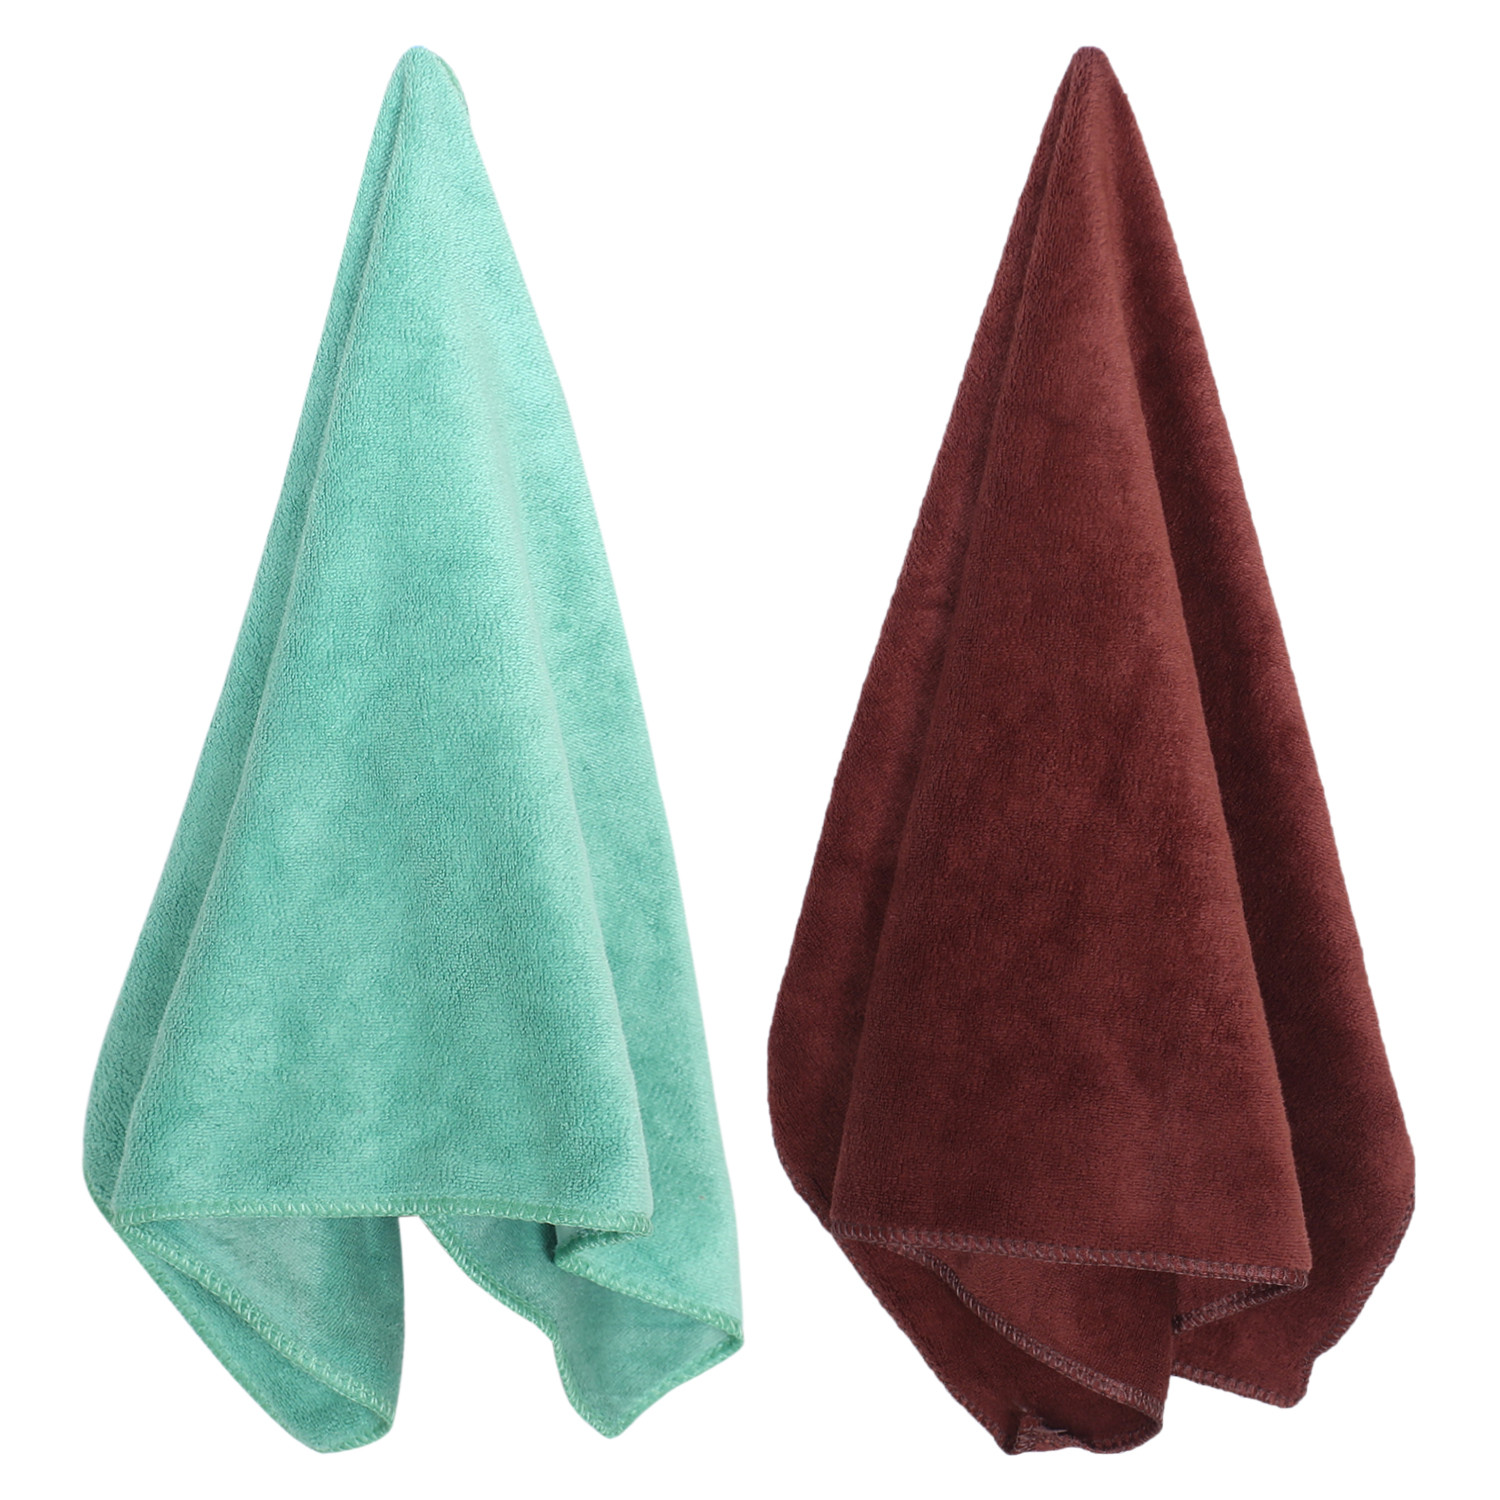 Kuber Industries Cleaning Cloths|Microfiber Highly Absorbent Wash Towels for Kitchen,Car,Window,24 x 16 Inch,Pack of 2 (Green & Brown)